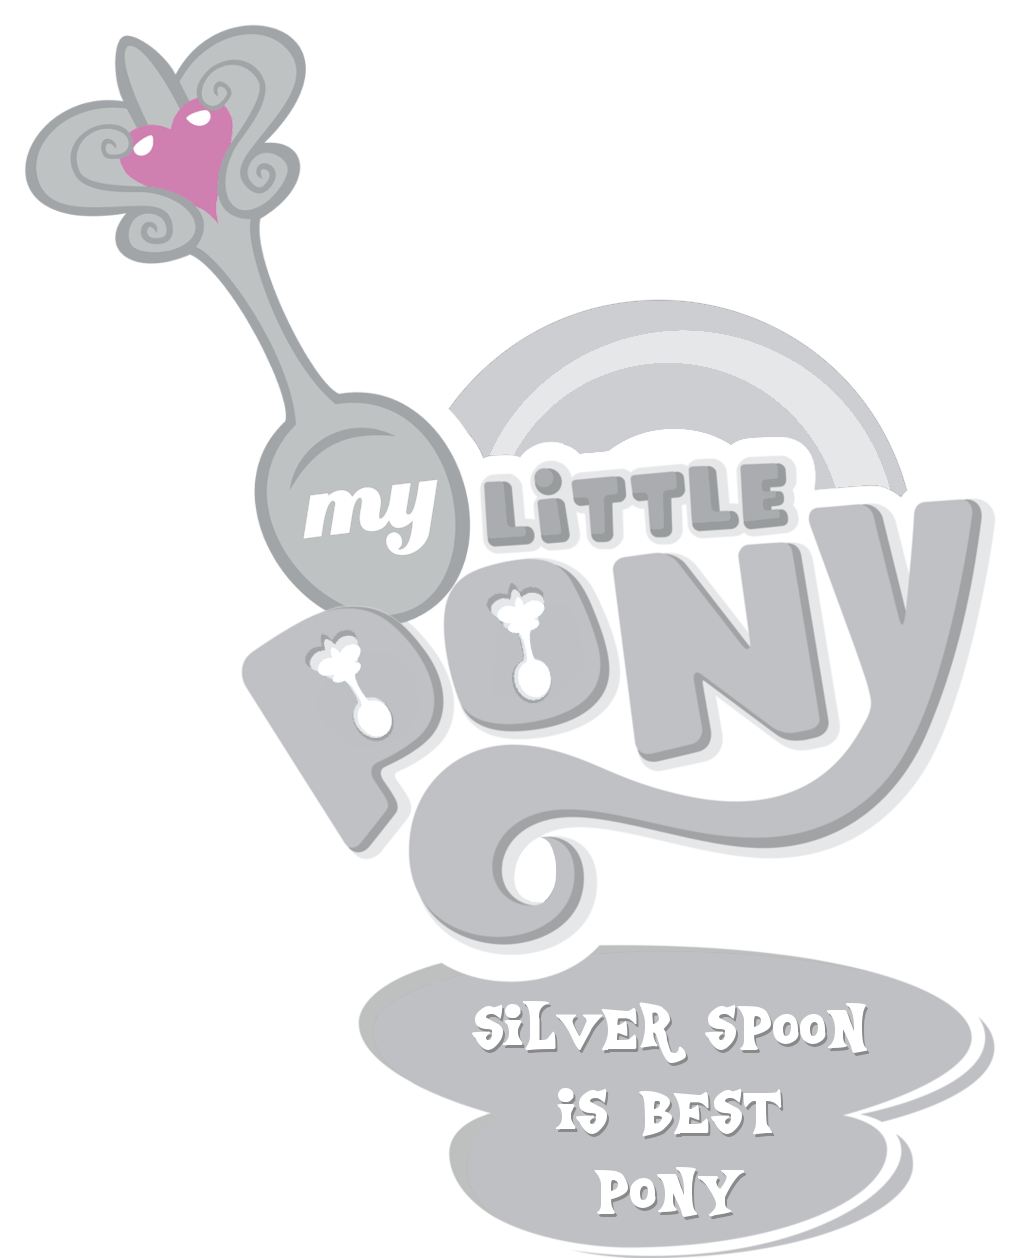 Best Pony, My Little Pony Logo, Safe, Silver Spoon - My Little Pony Friendship Is Magic Logo Png Clipart (1022x1258), Png Download